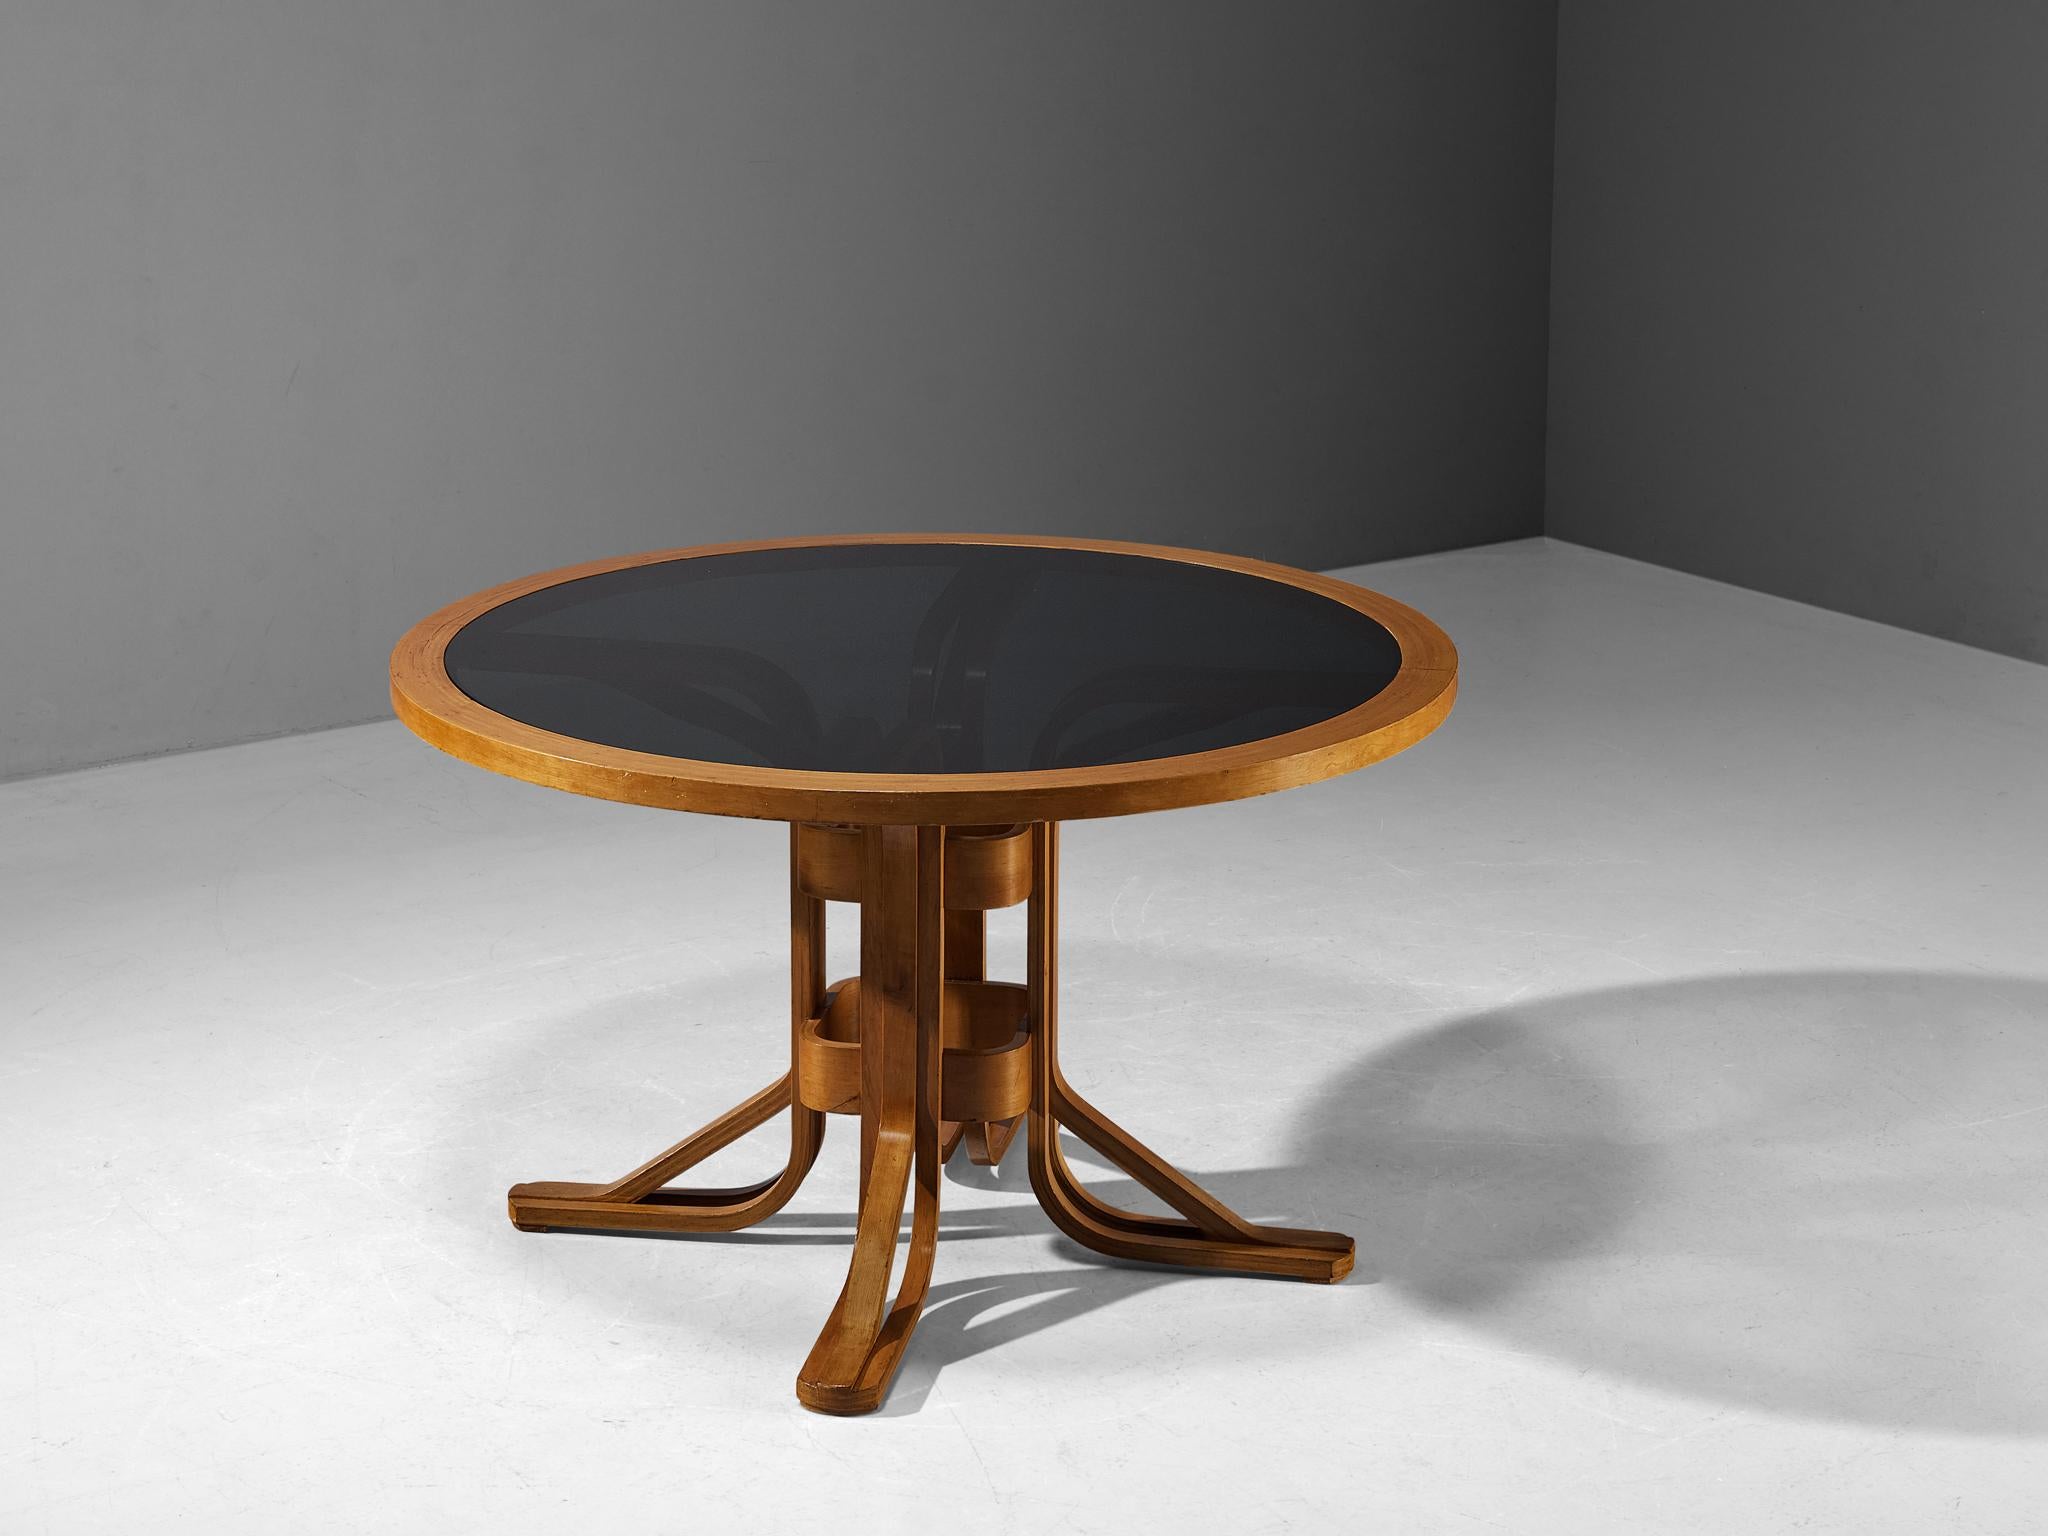 Dining table, maple plywood, smoked glass, Italy, 1970s

This postmodern dining table is well-constructed in a precise manner implementing geometric shapes that contribute to its architectural appearance. In the highly sculptural base, you can see